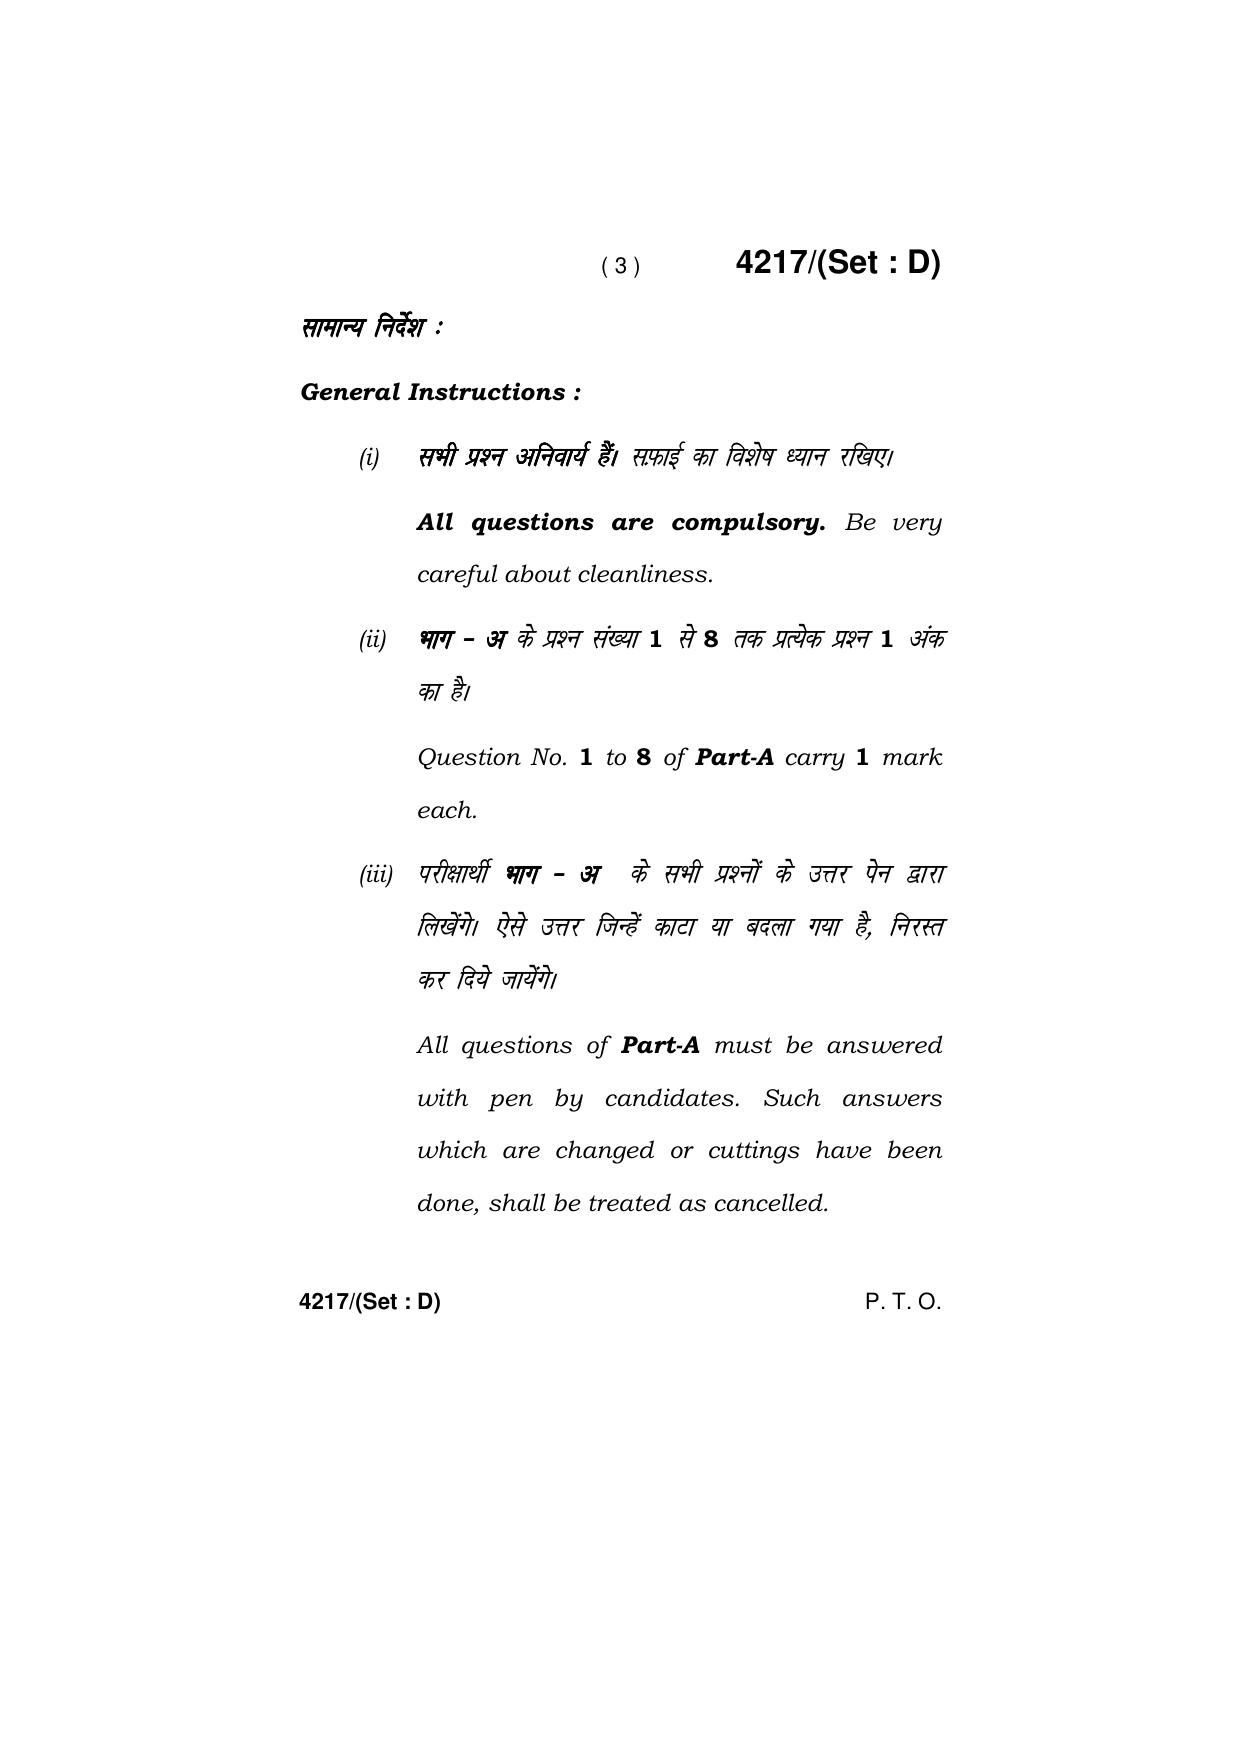 Haryana Board HBSE Class 10 Drawing (All Set) 2019 Question Paper - Page 27